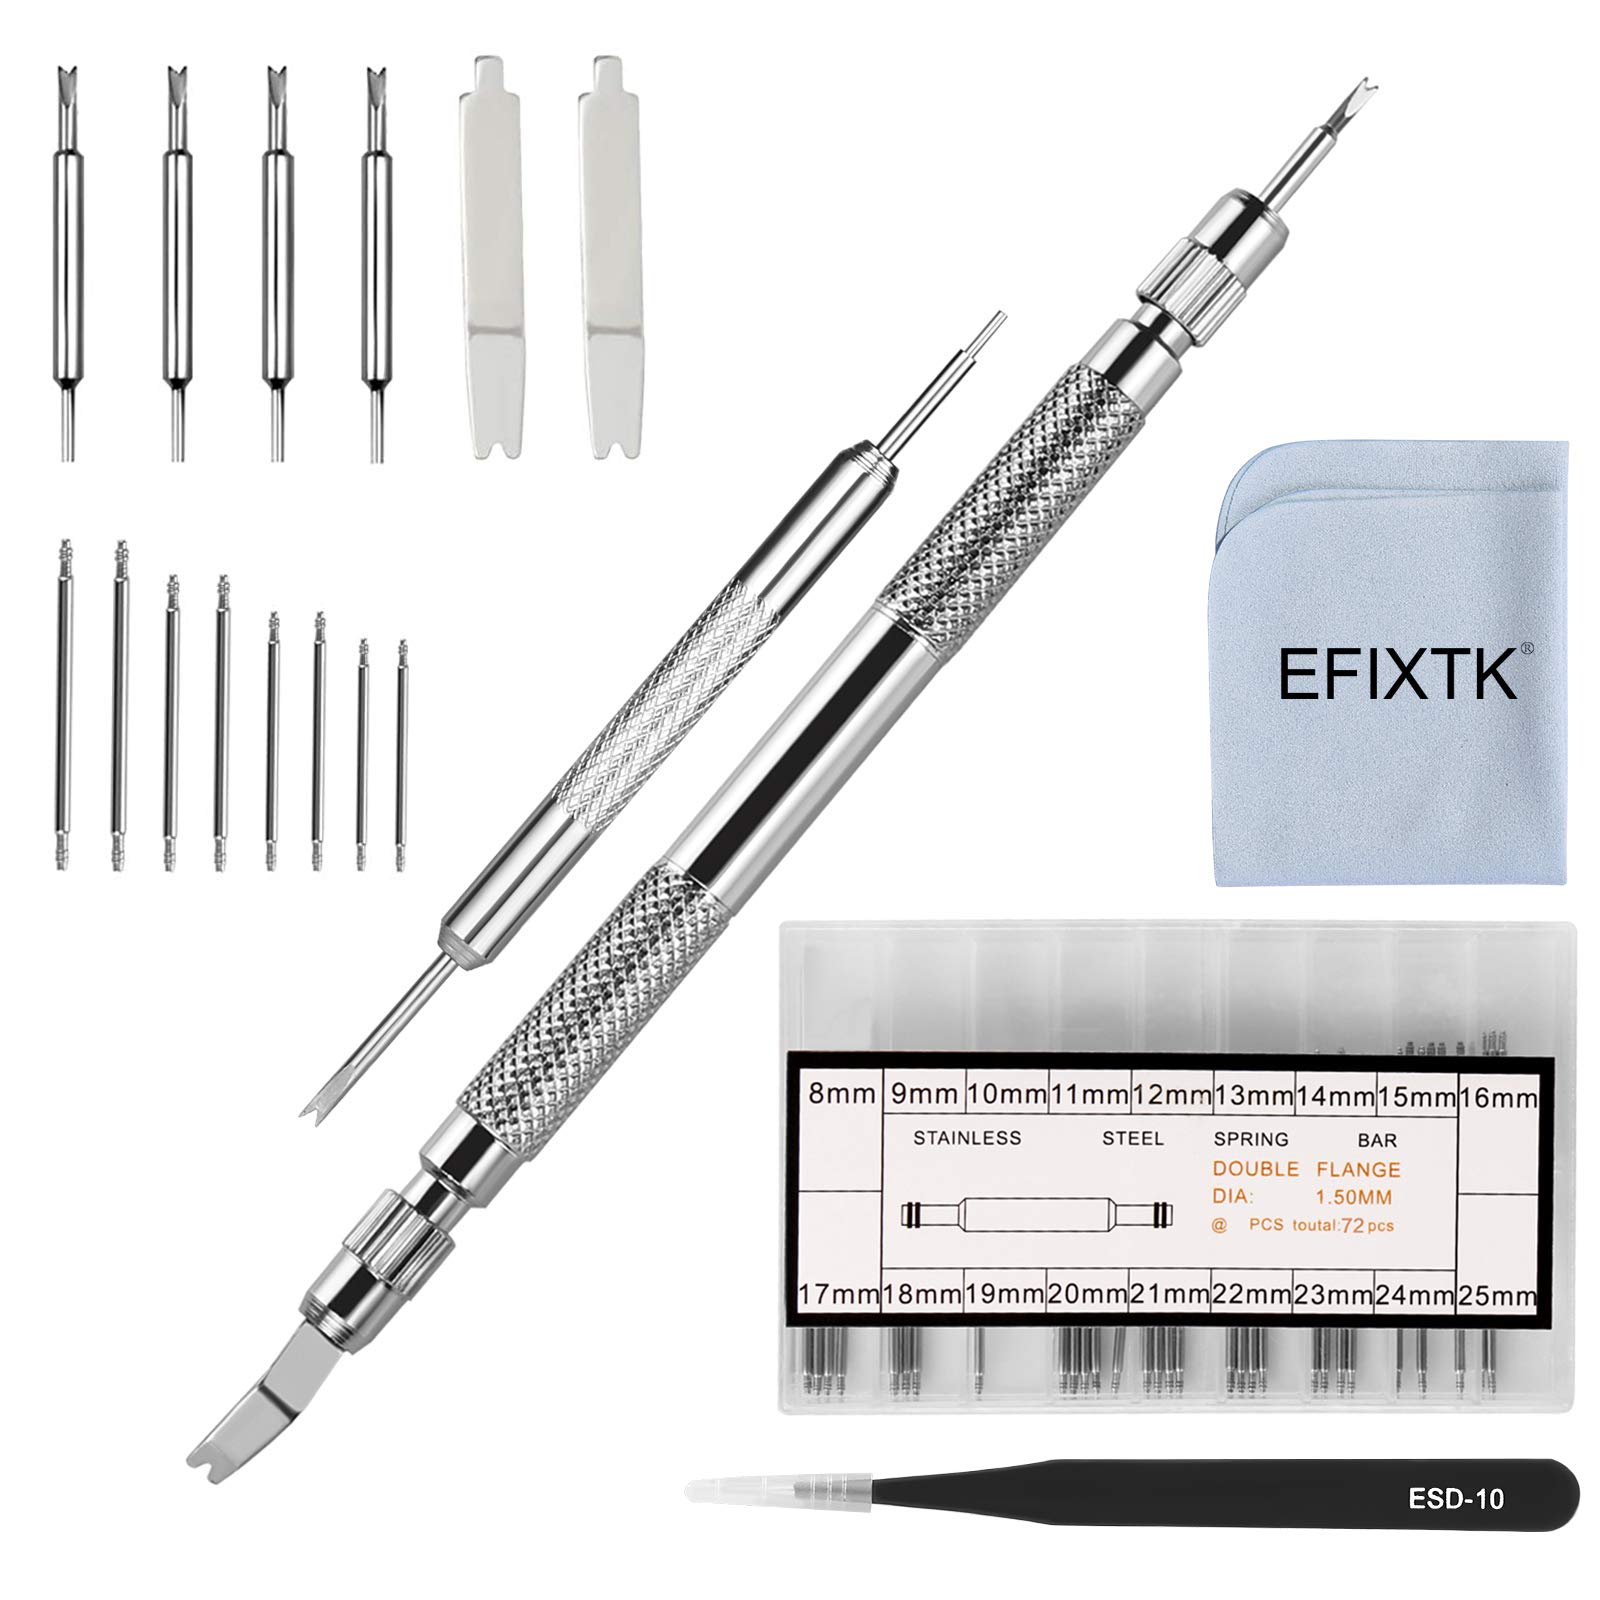 EFIXTK Spring Bar Tool Set with Extra 6 Tips Pins for Watch Wrist Bands Strap Removal Repair Fix Kit,72PCS Extra Watch Pins